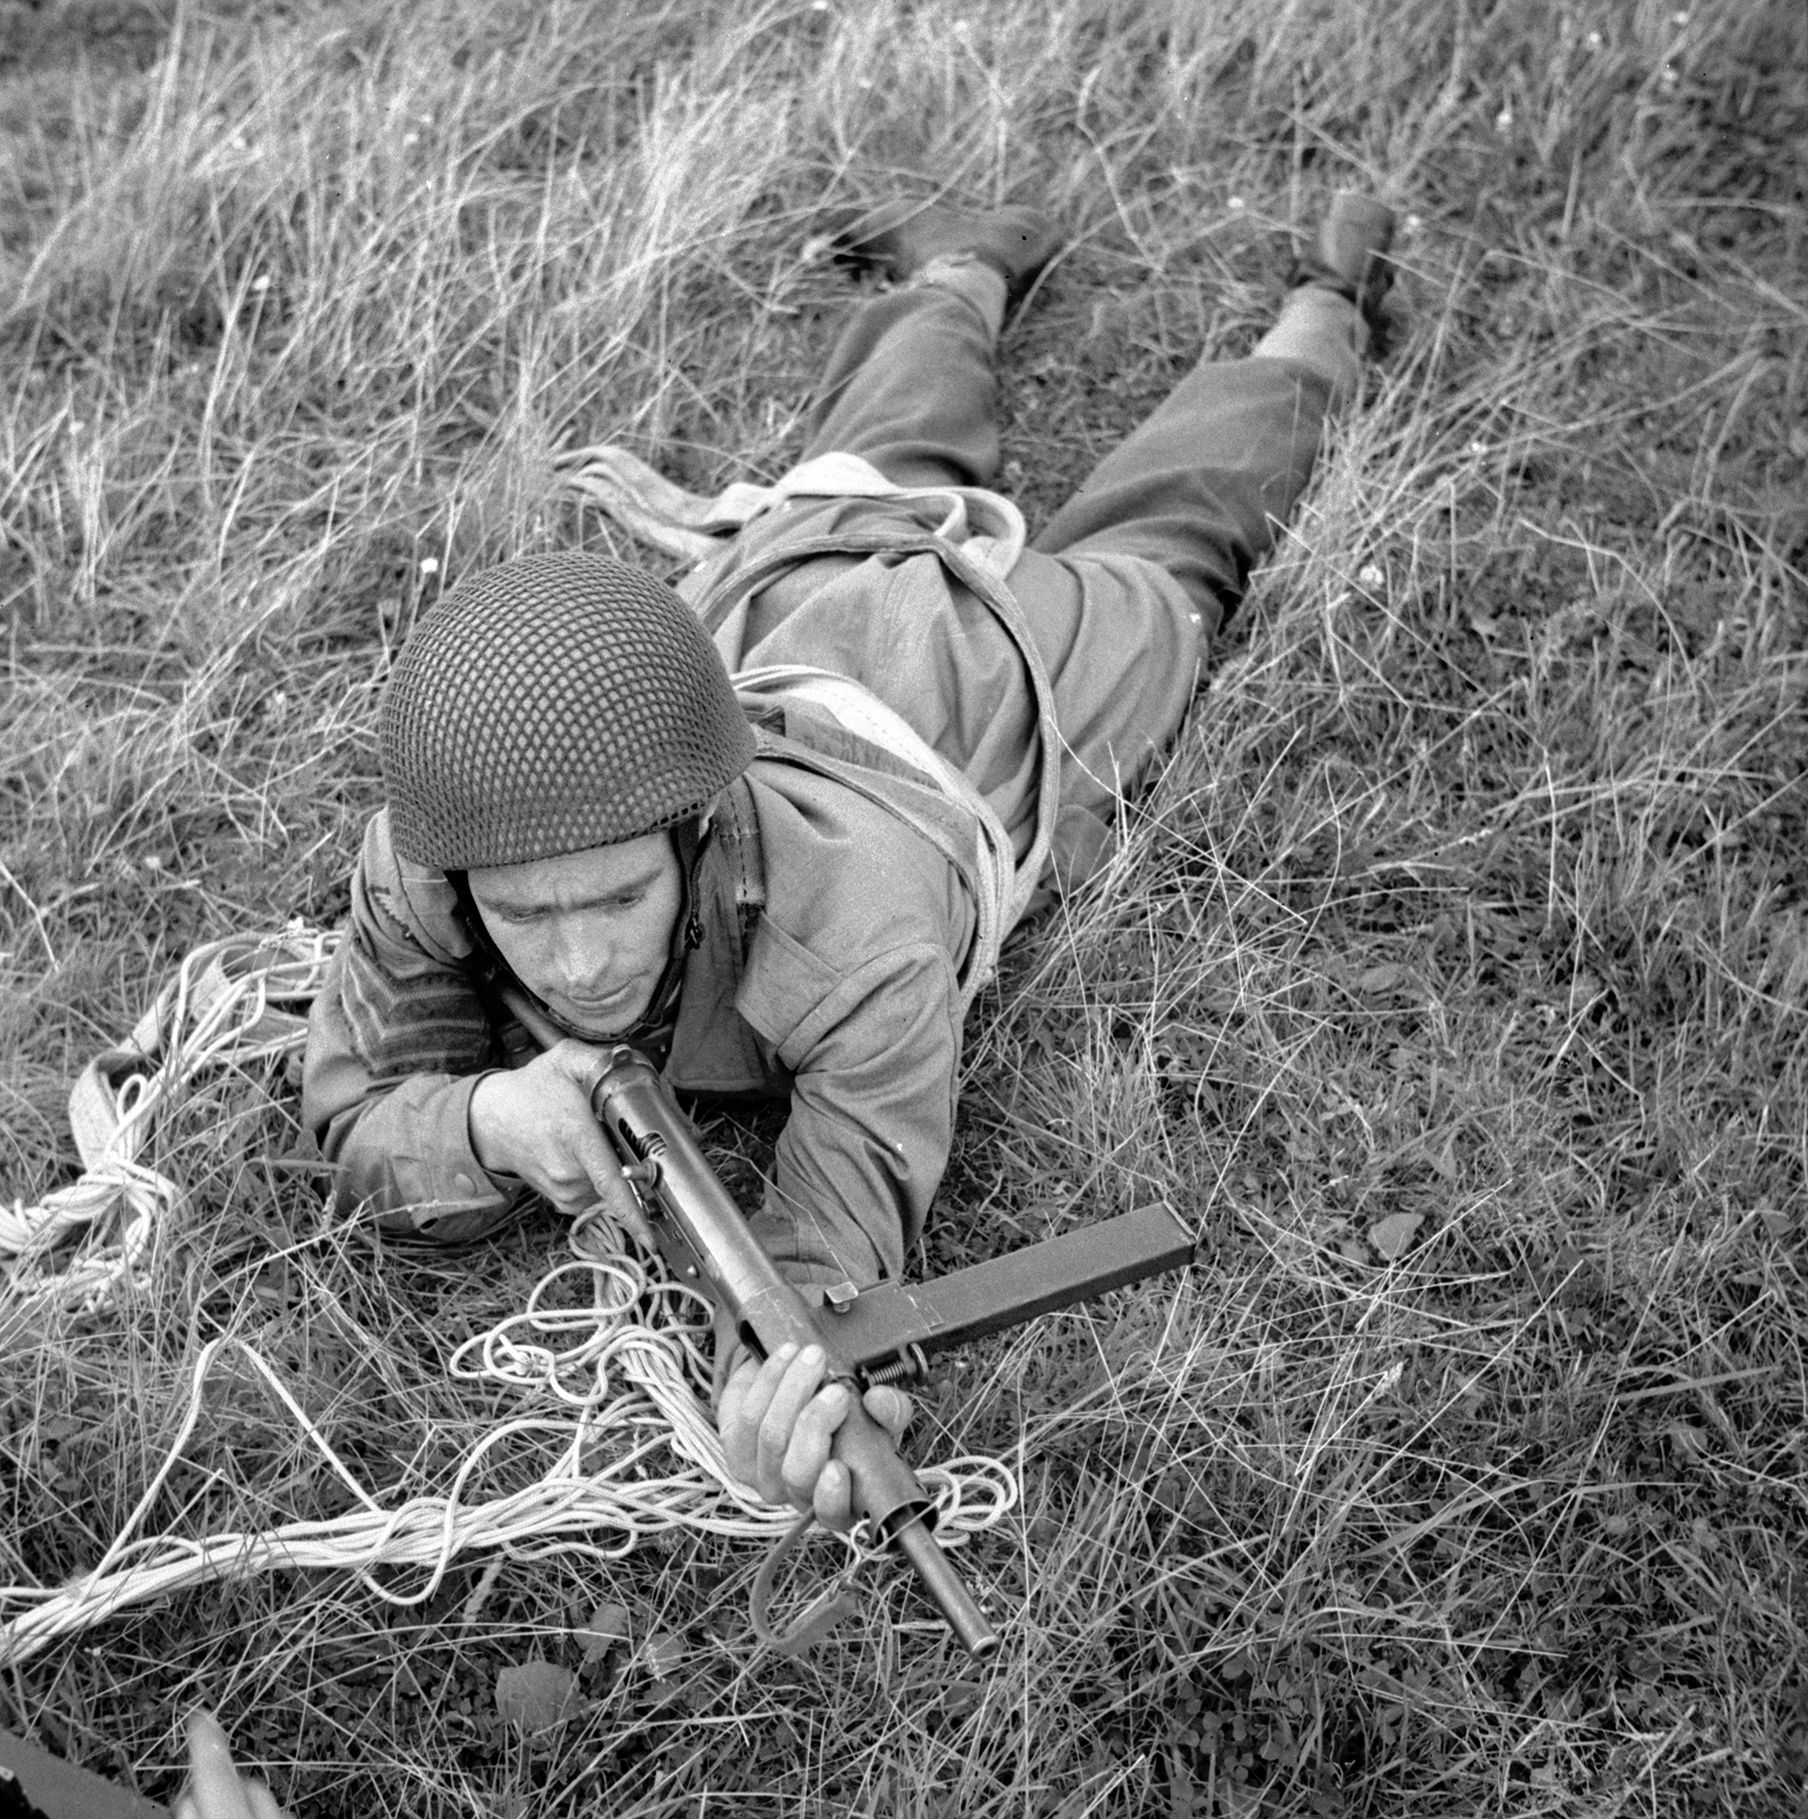 A paratrooper with the 2nd Parachute Battalion takes part in combat training. Paras conducted the Bruneval Raid to seize components of a new German radar system from a post in the coast of France.